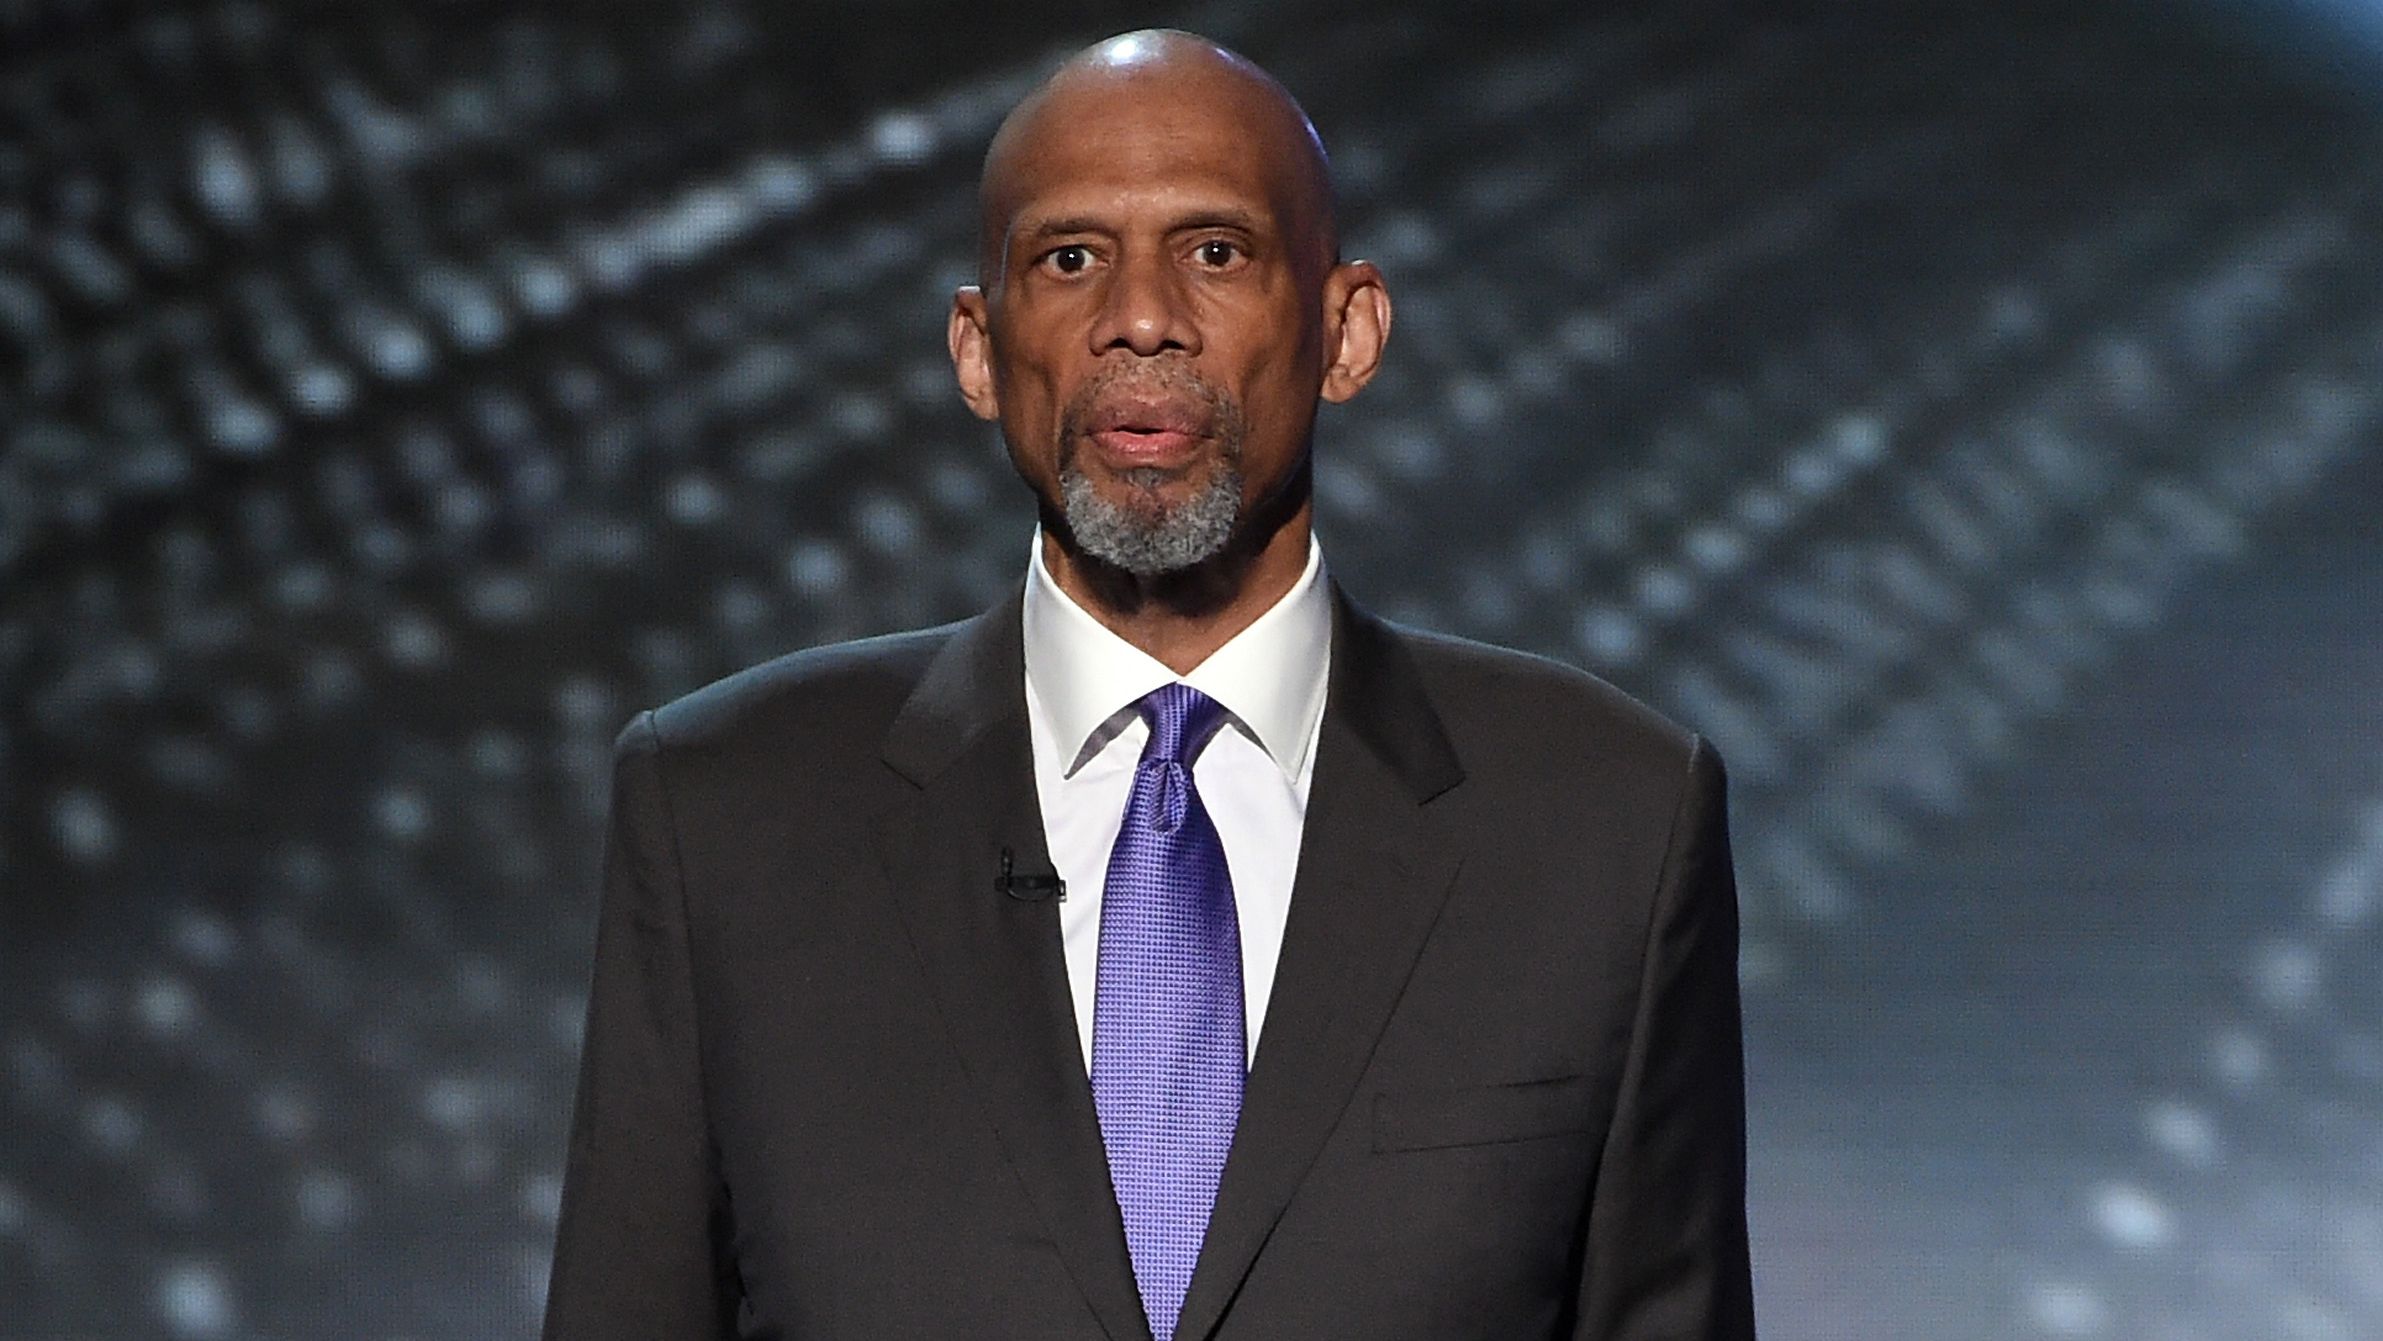 Kareem Abdul-Jabbar defends protests and says racism is deadlier